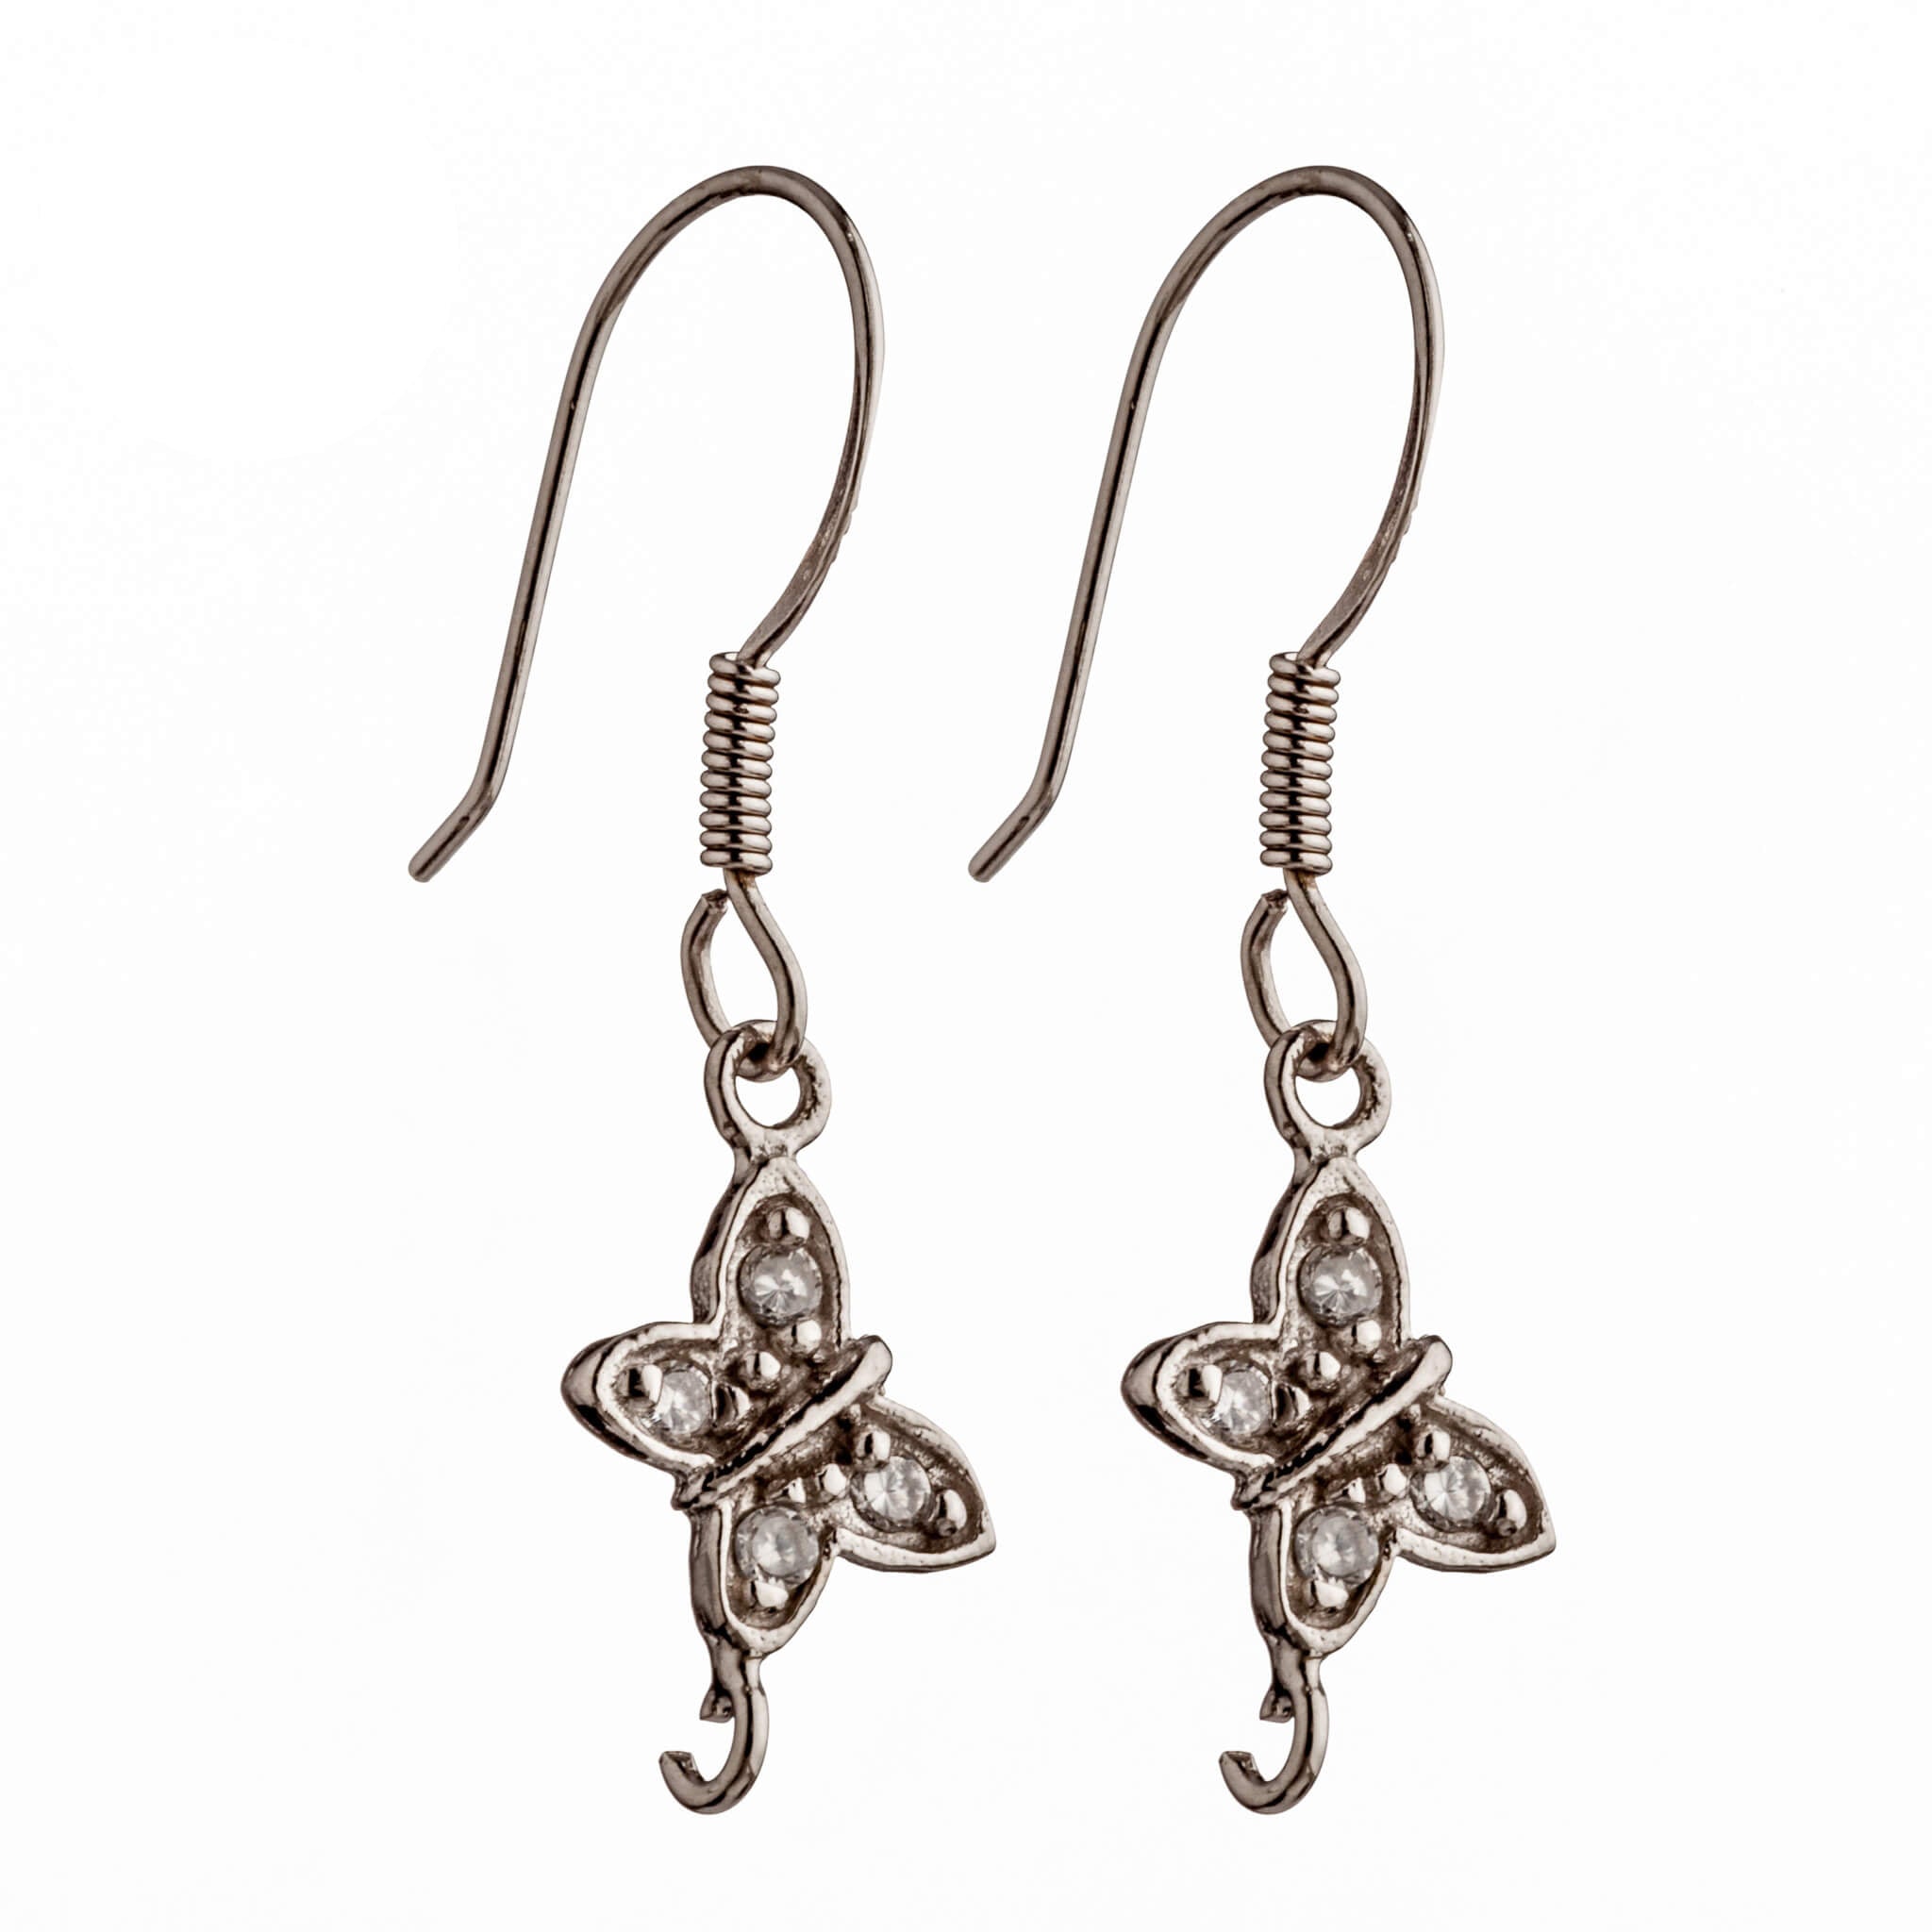 Ear Wires with Cubic Zirconia Inlays and Earring Components in Sterling Silver 28.5x6.8mm